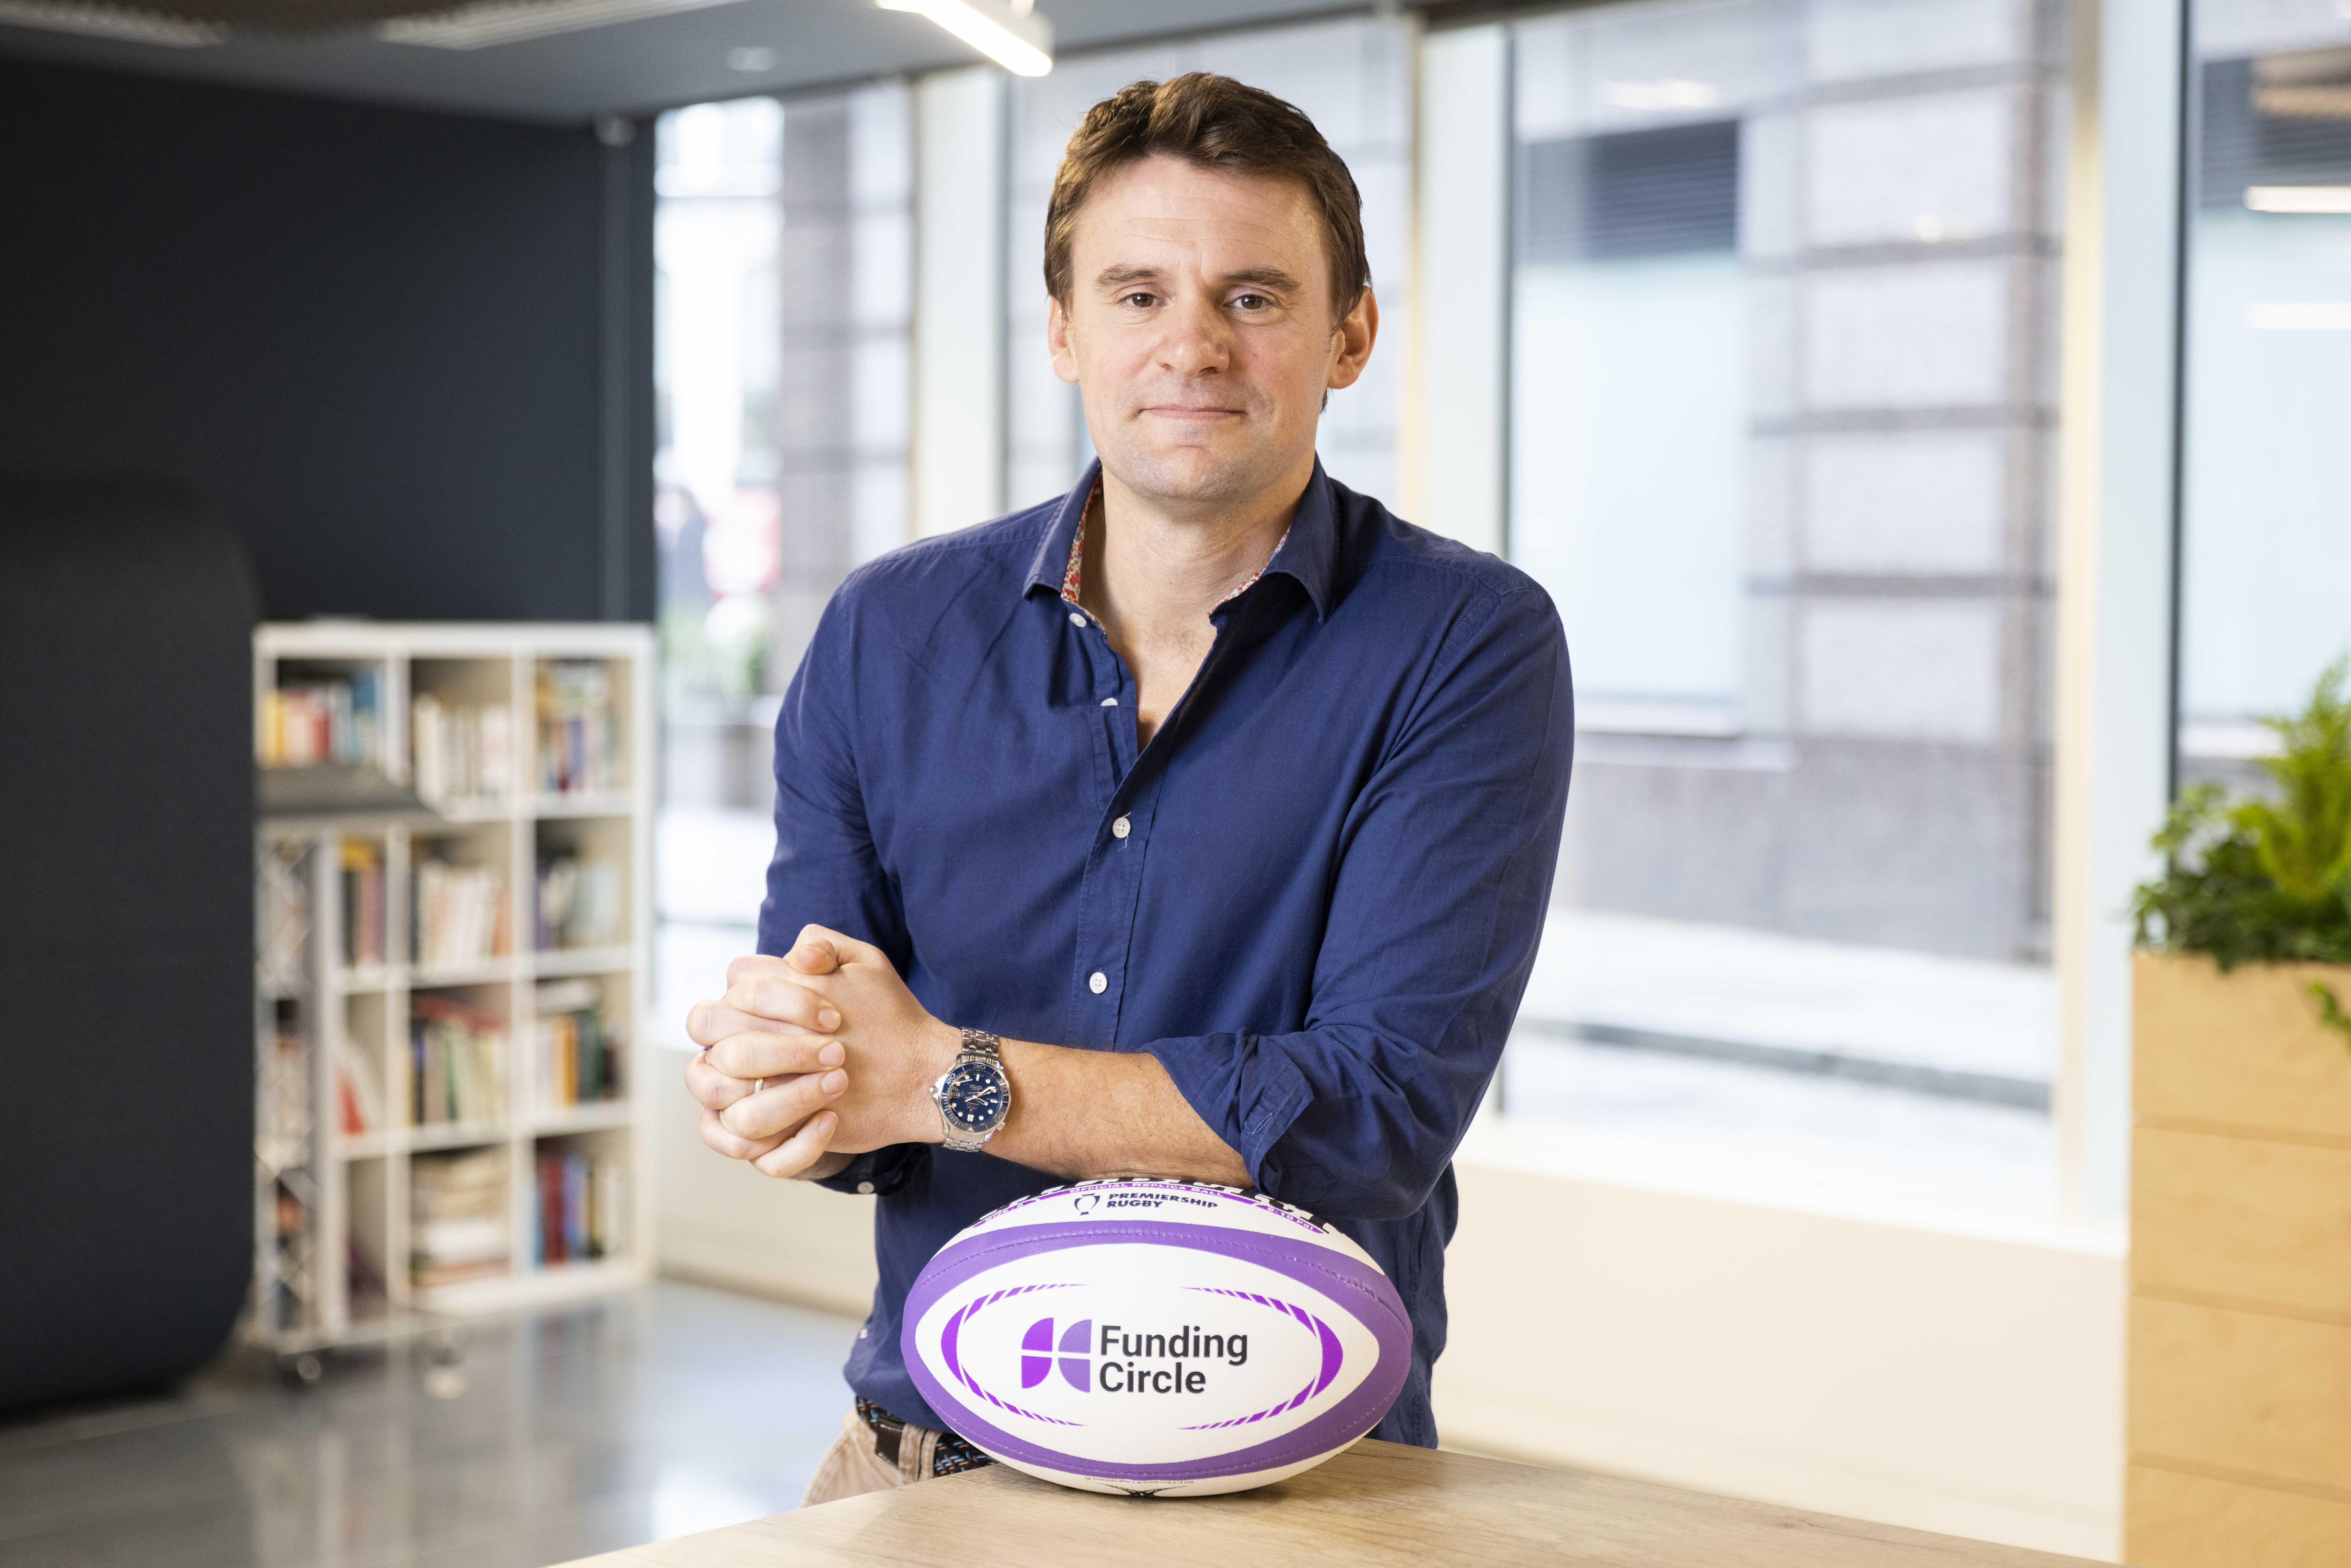 Premiership Rugby chief executive Simon Massie-Taylor is involved in negotiations for the next Professional Game Agreement